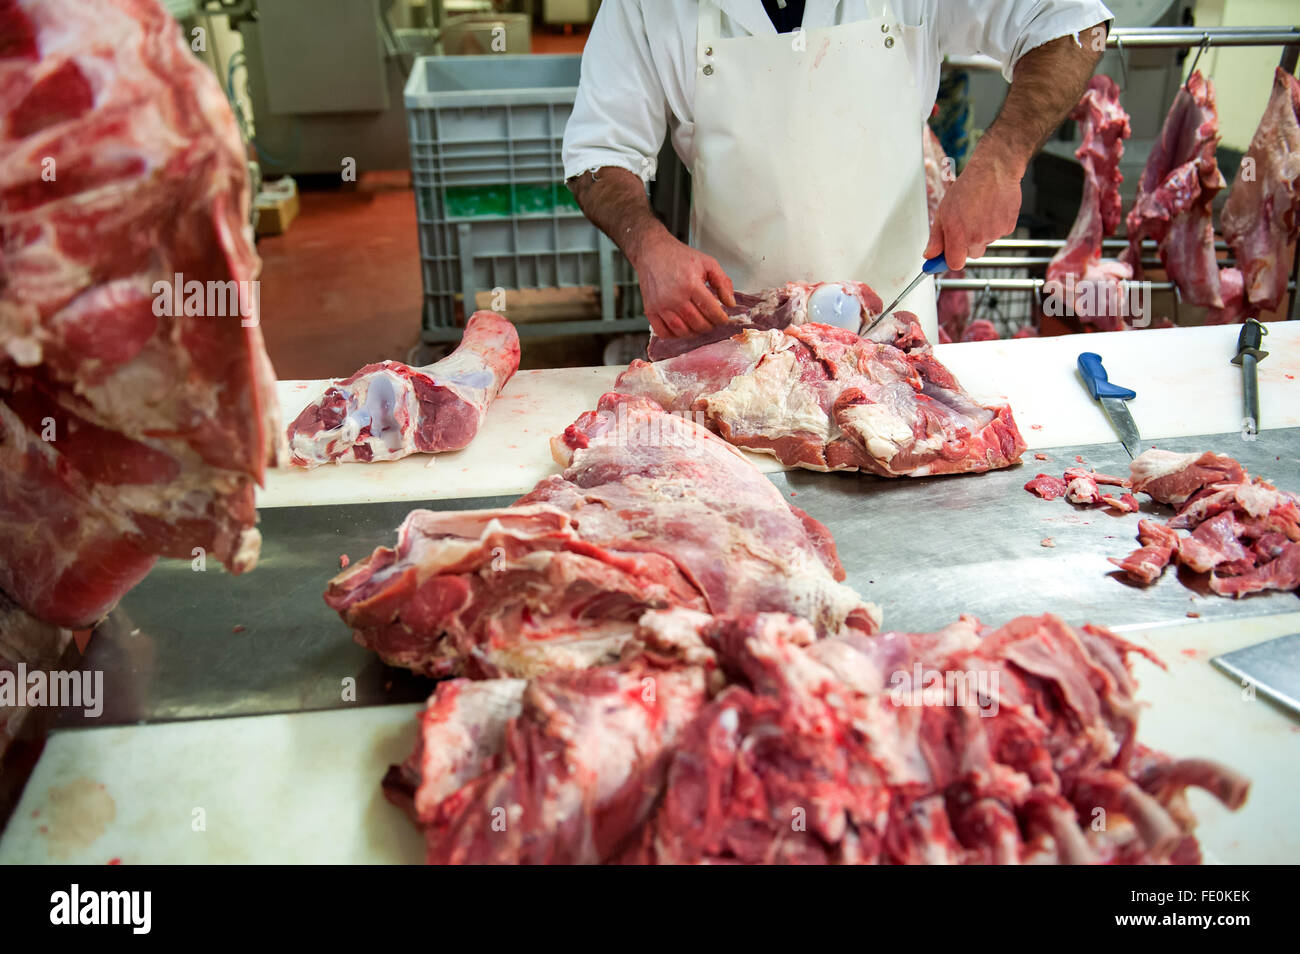 Unidentifiable male butcher surrounded by slabs of raw meat in food processing plant using knifes to slice Stock Photo